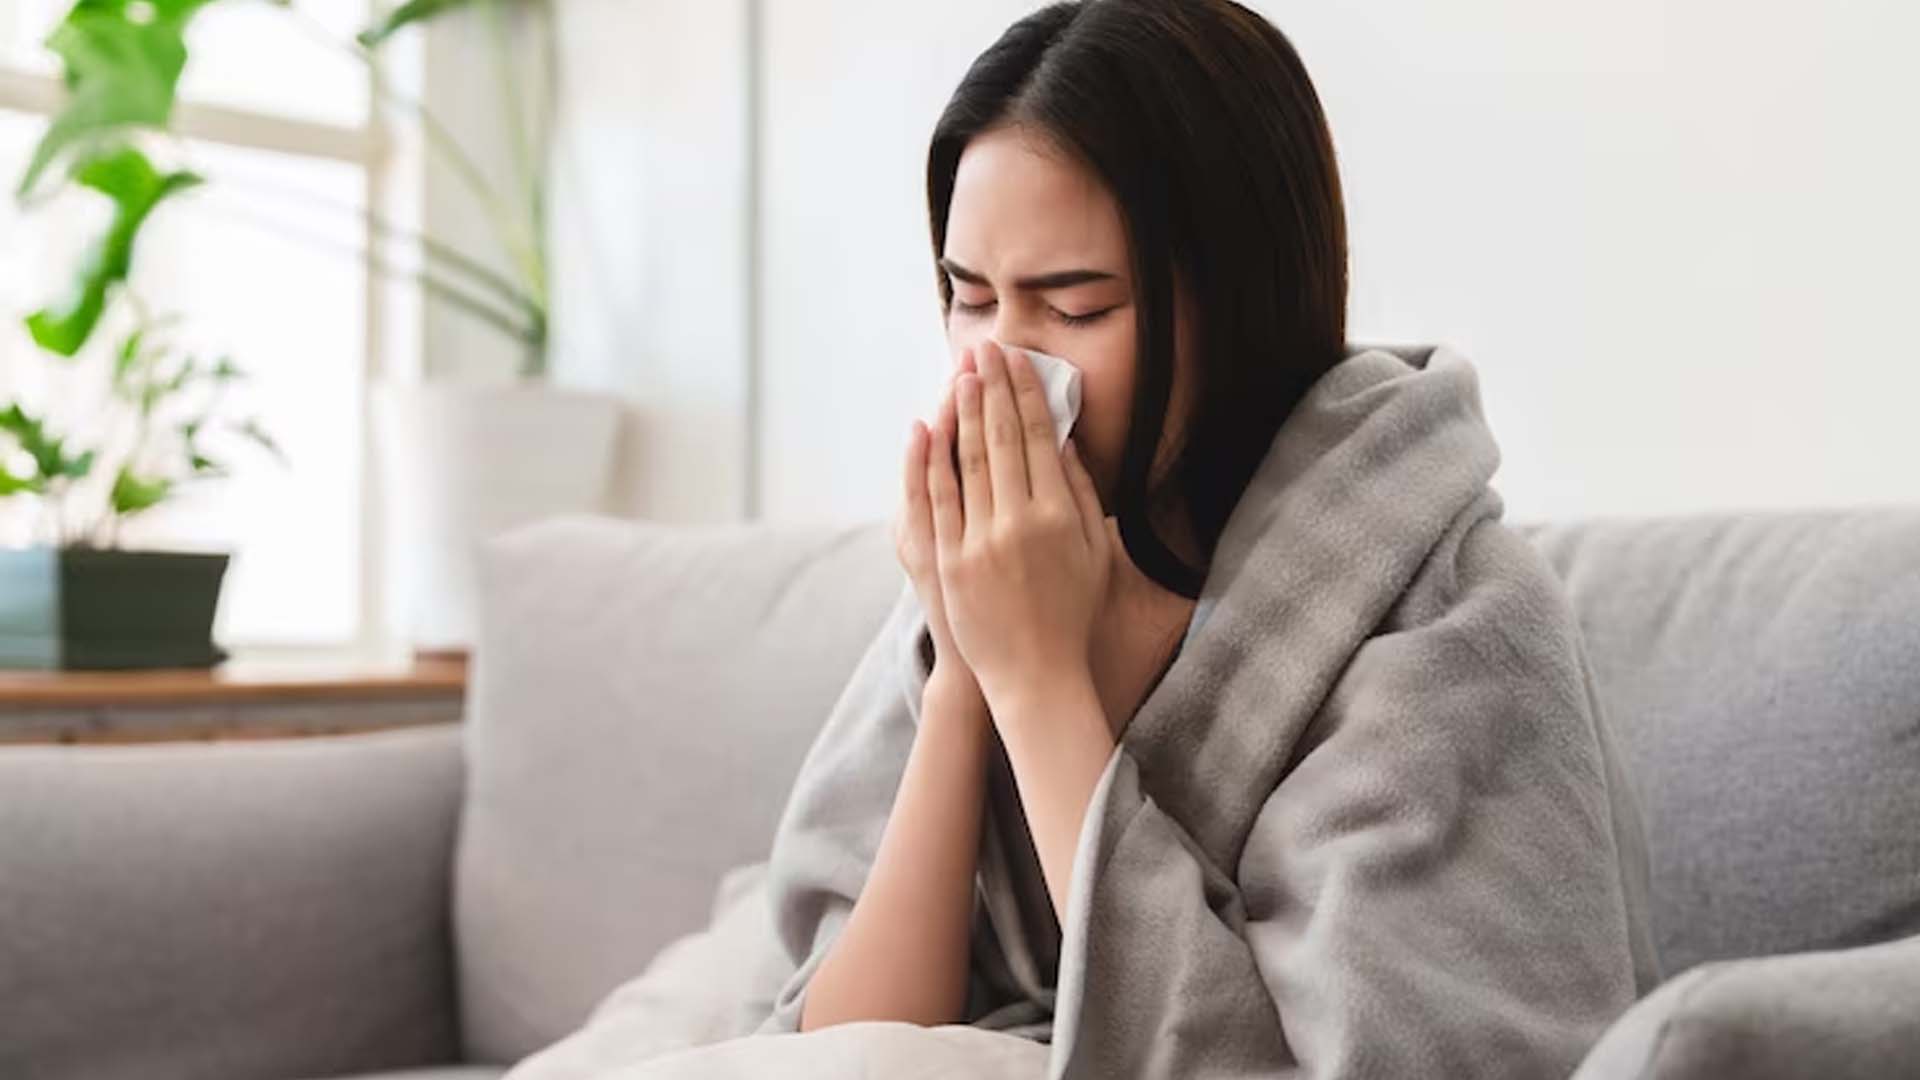 Women suffering from cold or flu